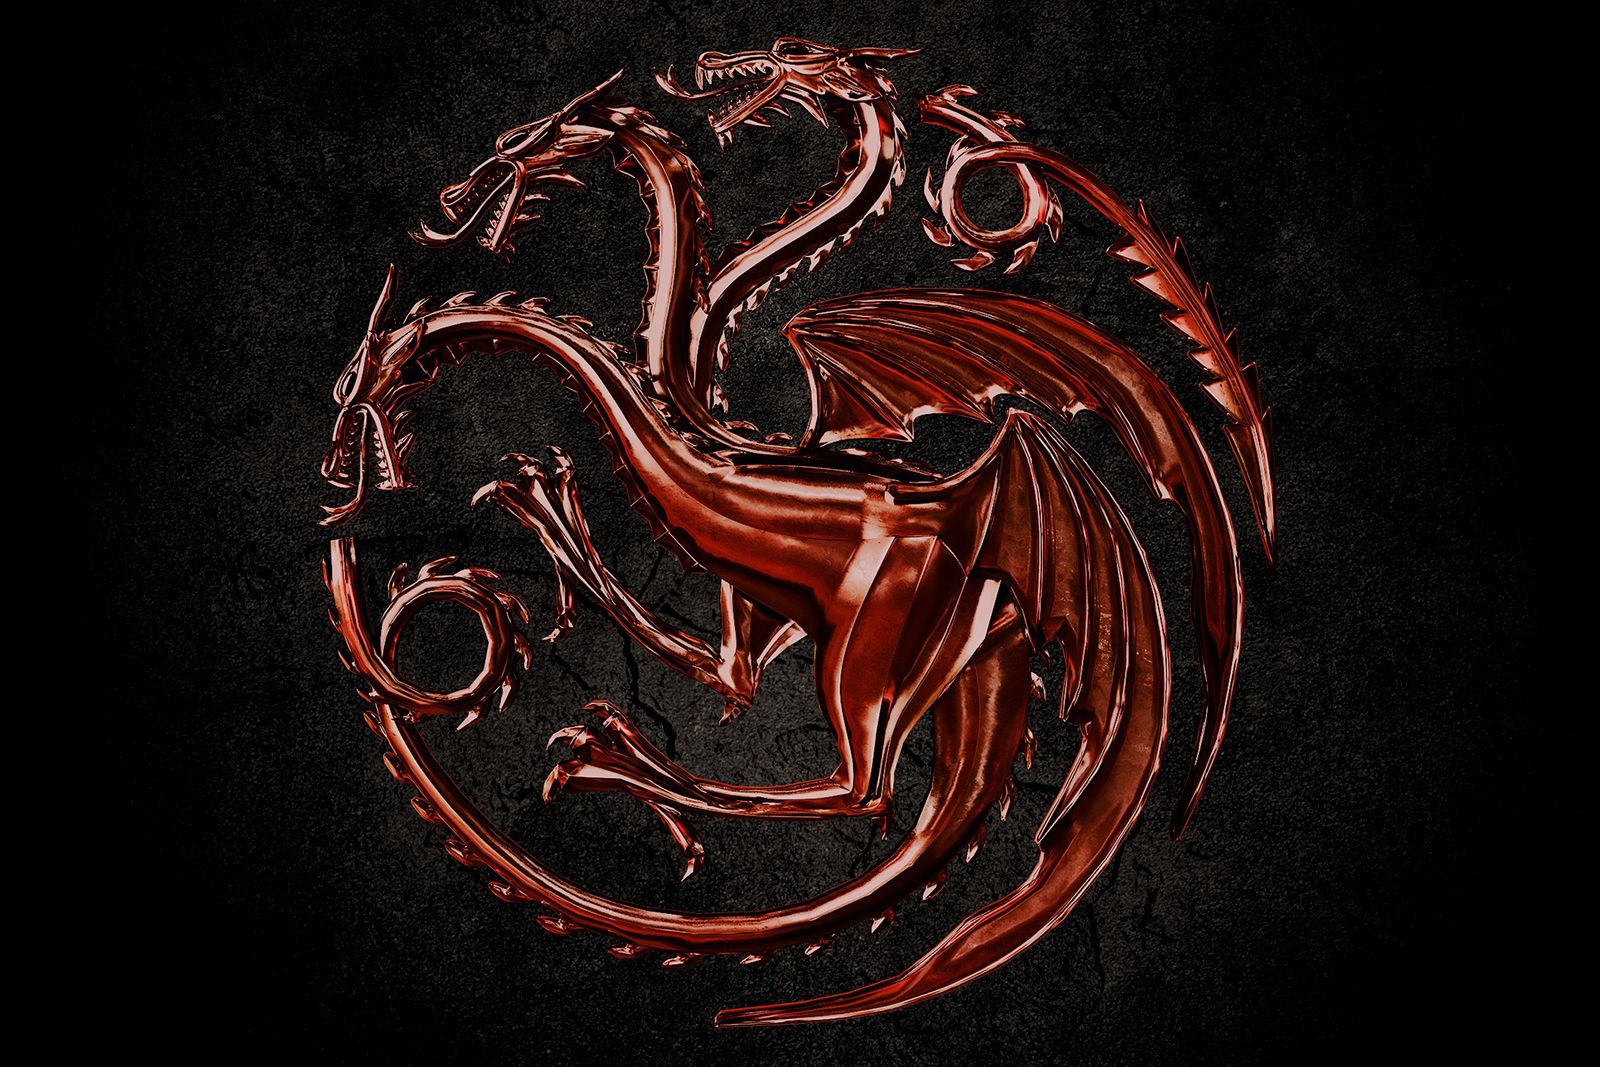 House of the Dragon will be first Game of Thrones spinoff previous efforts cancelled image 1